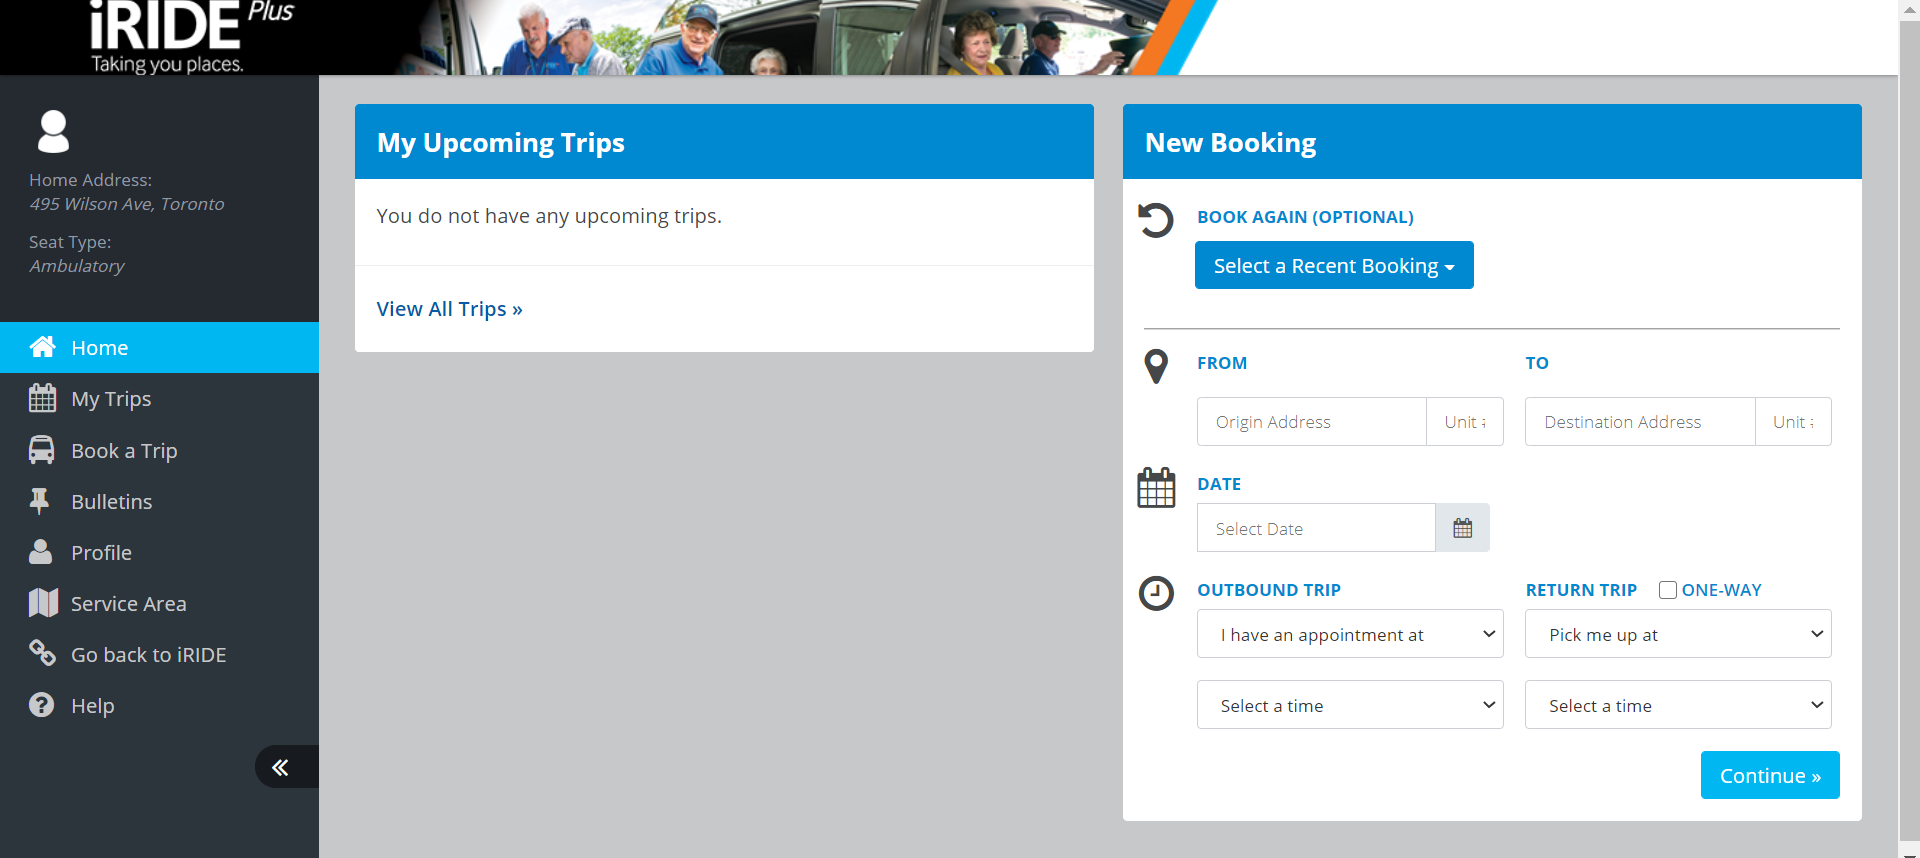 A screenshot of the home page of the iRIDE Passenger Portal showing upcoming trips and new bookings.